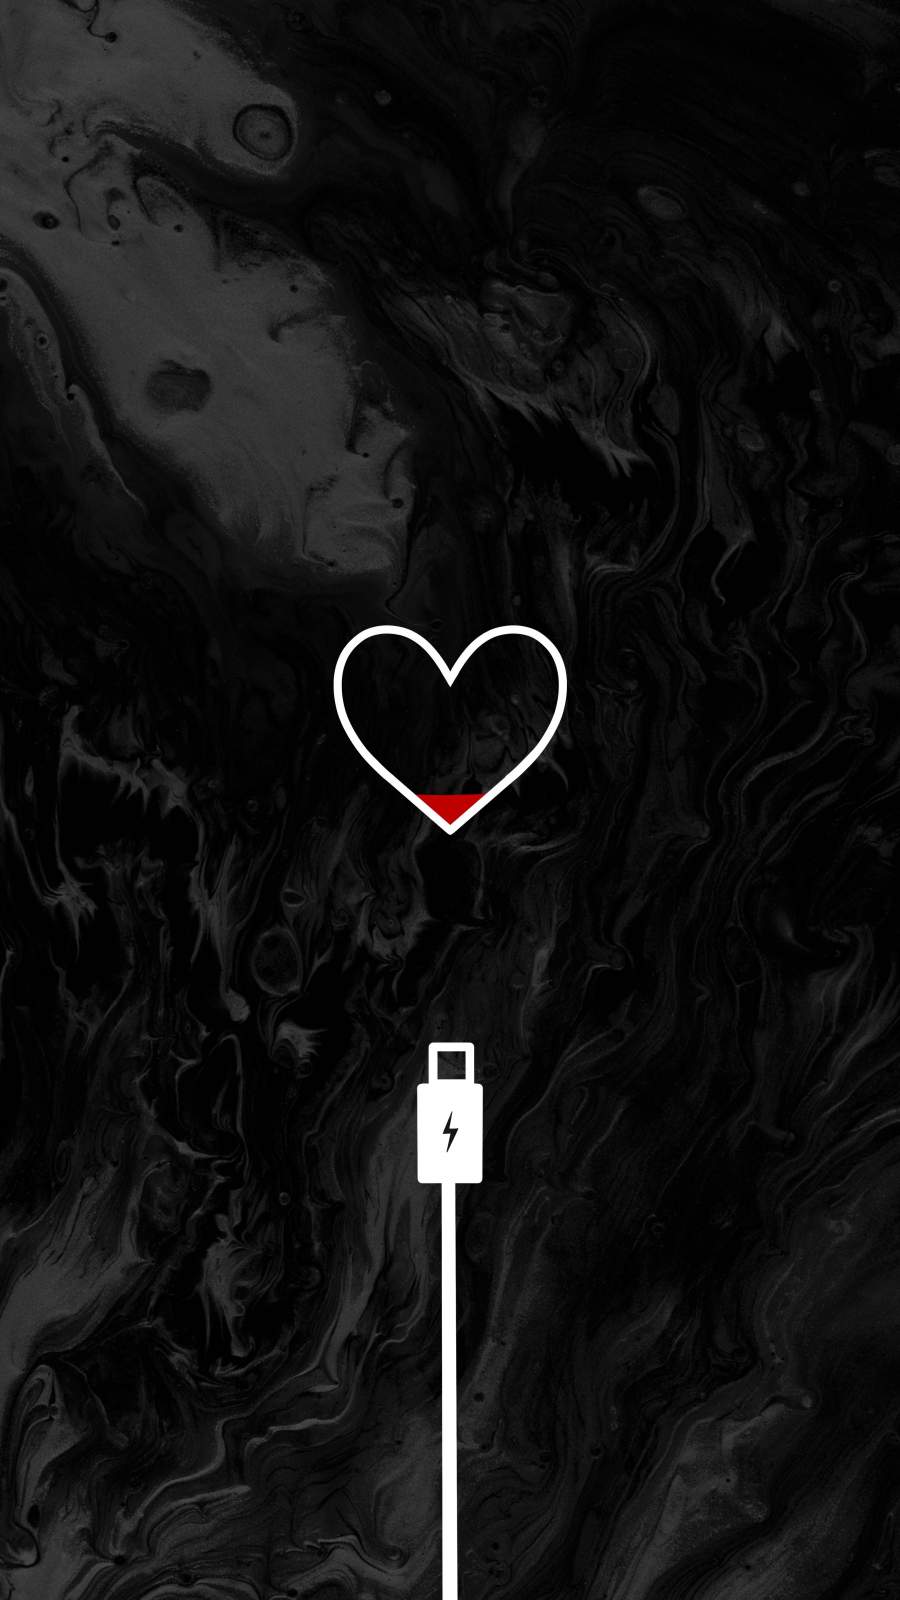 Low Love - IPhone Wallpapers : iPhone Wallpapers